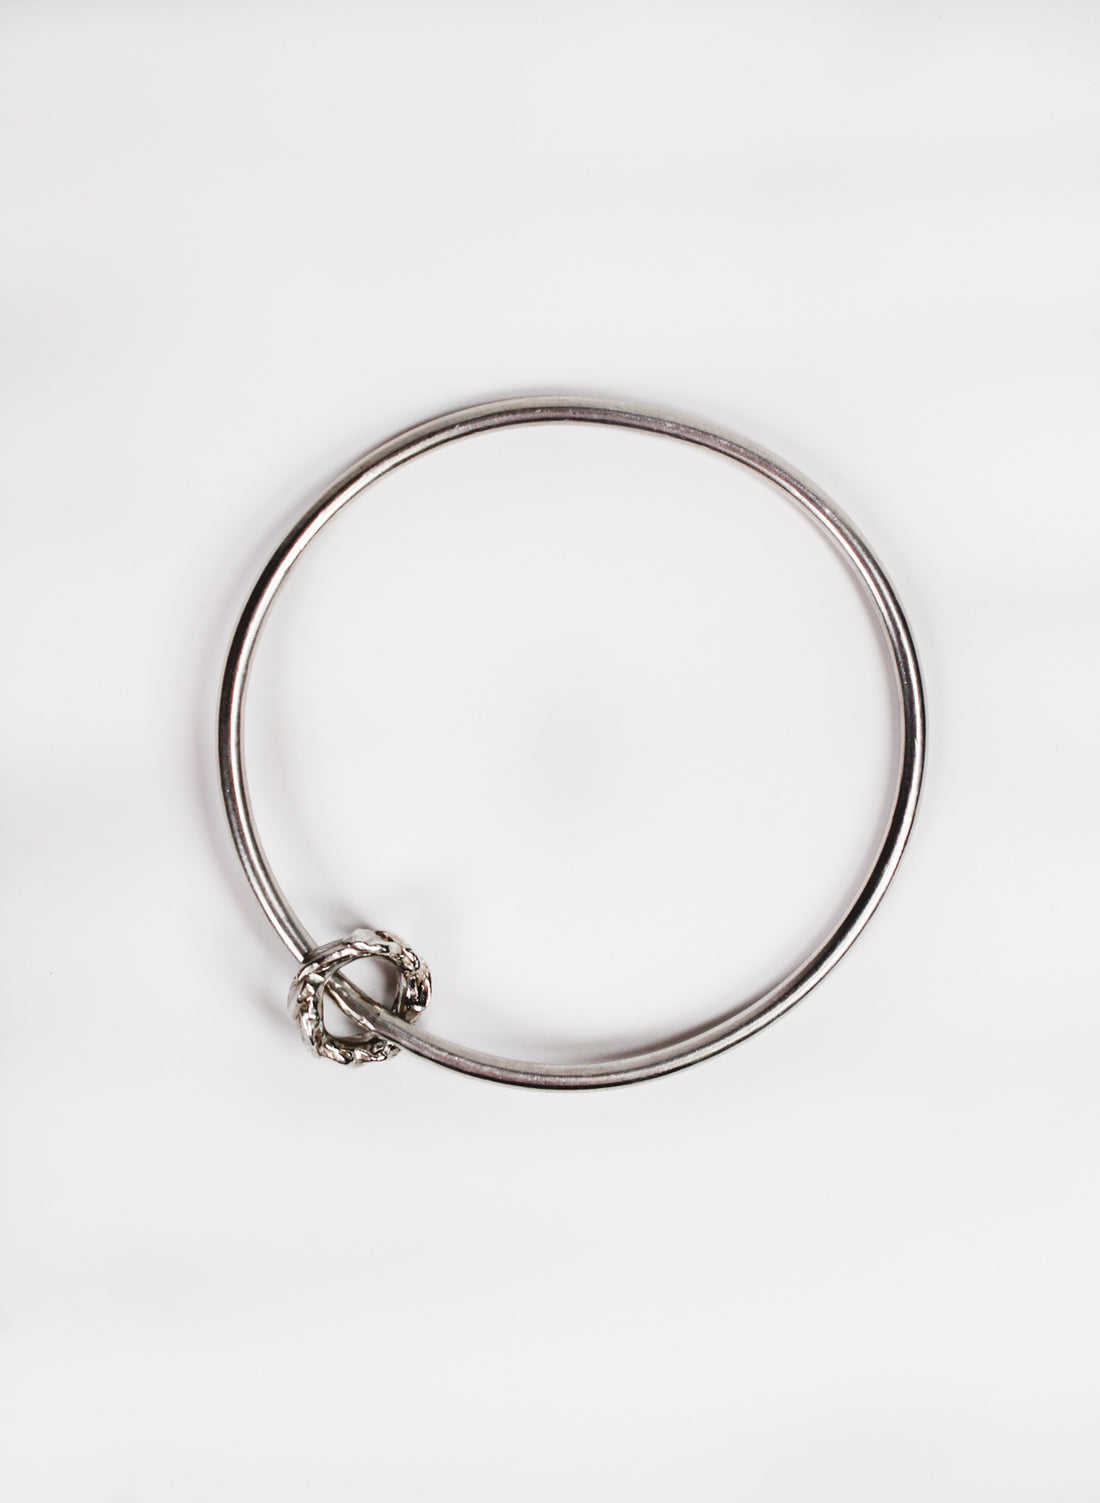 Reveal Sterling Silver Bangle